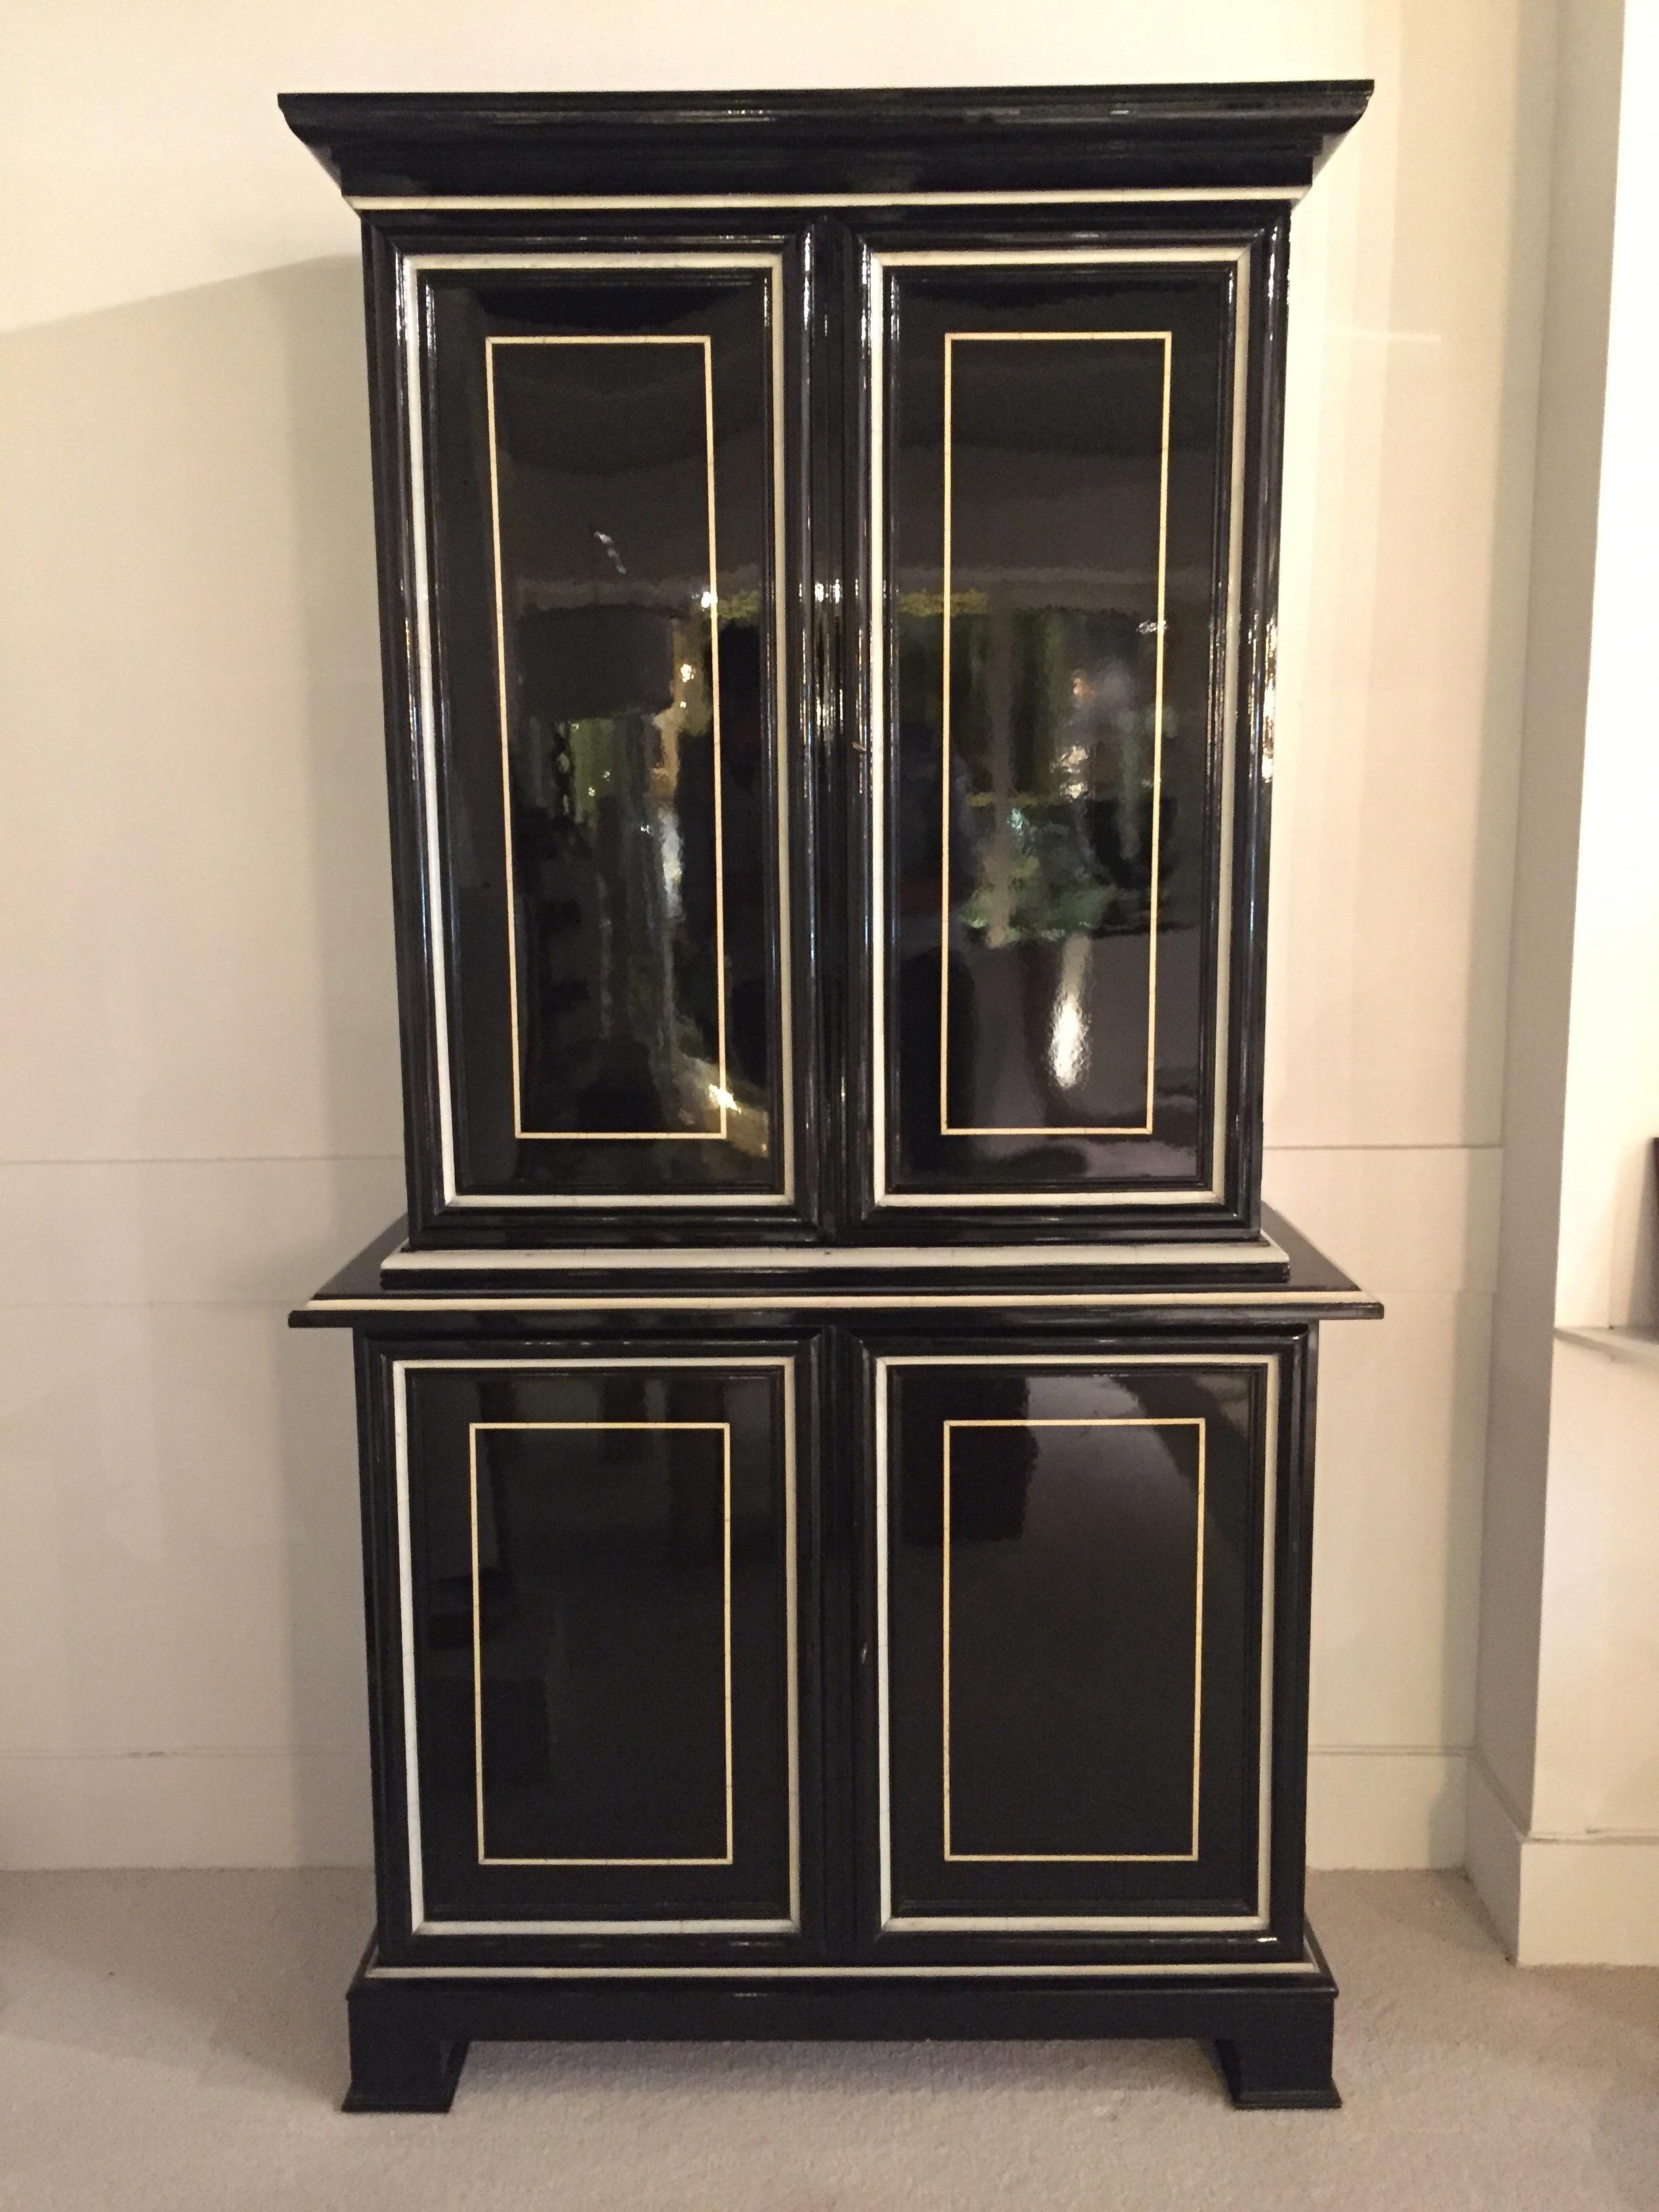 Black and faux ivory lacquered Trumeau by Maison Jansen.
Mirrored Interior on the top doors.
Can be found on Maison Jansen Book by Archers Abbot.
Great condition for the lacquer.